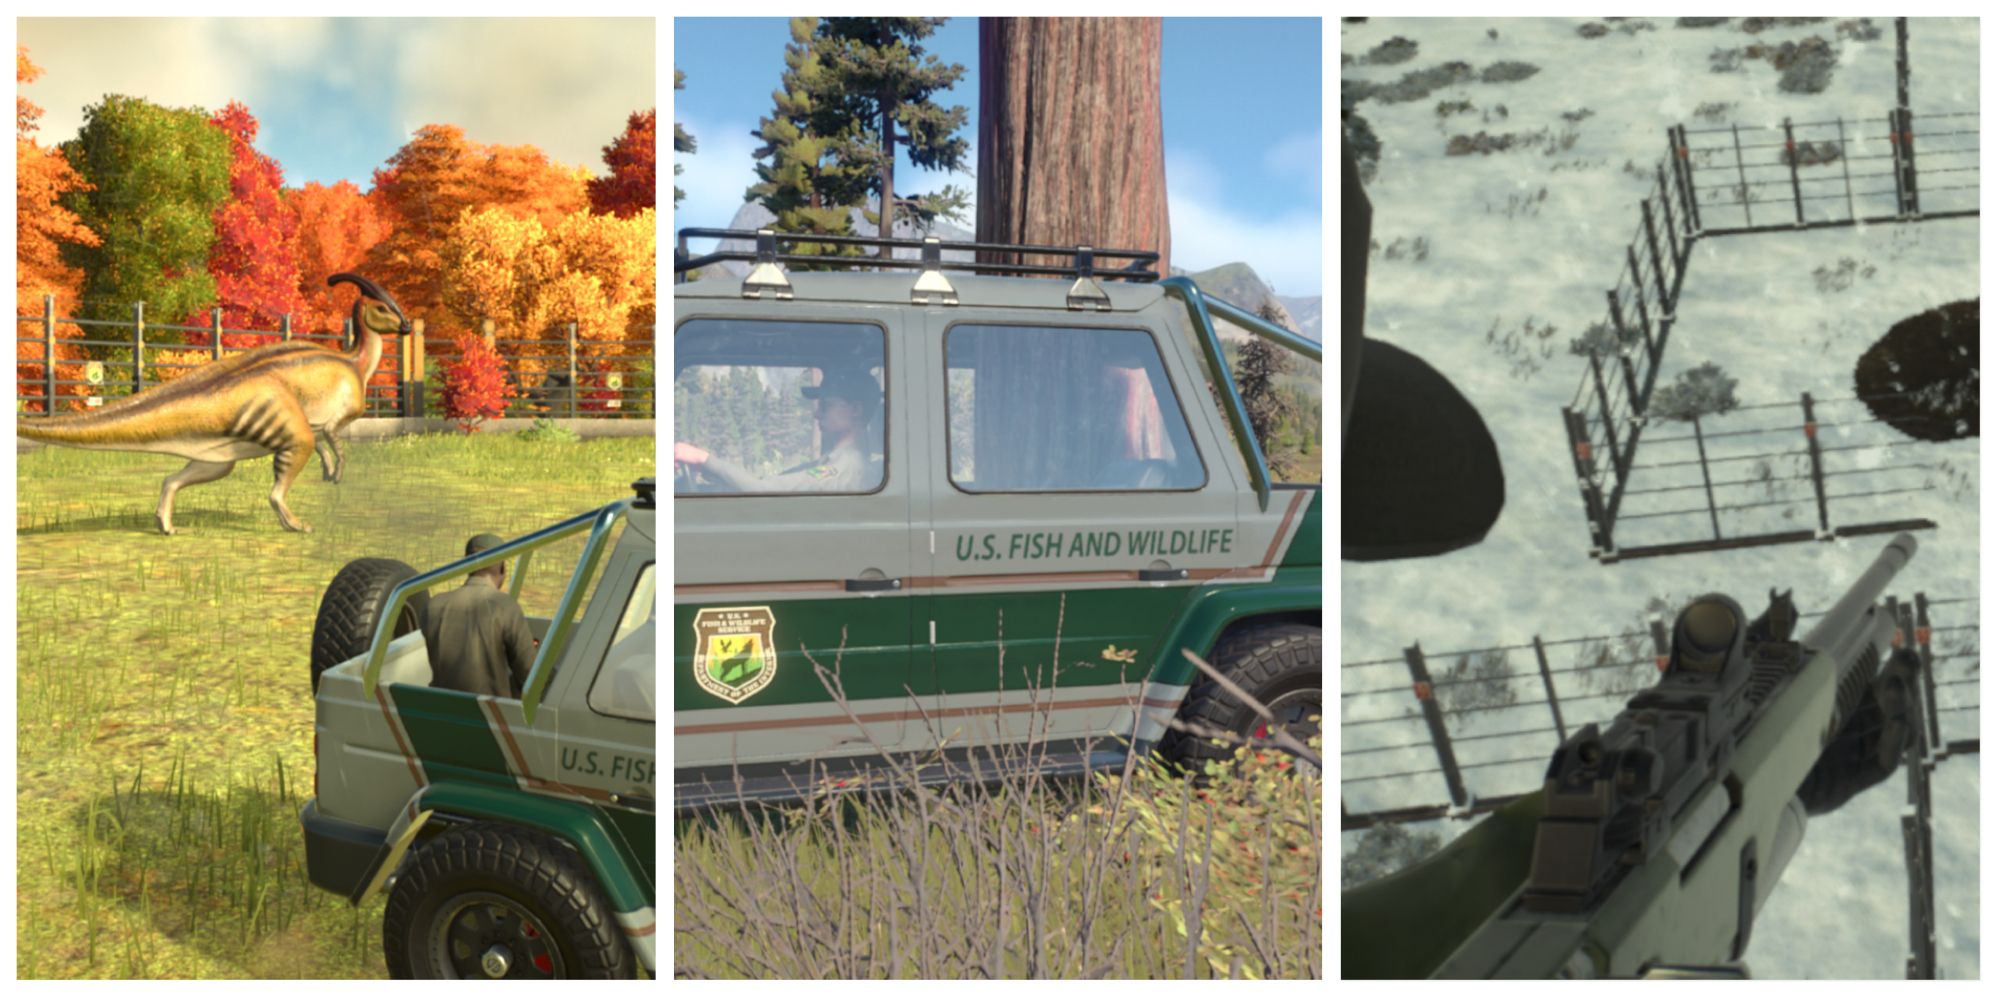 on the left is a jeep near roaming dinosaurs, in the middle is a tree stuck inside of a jeep and on the right is a man aiming a rifle at a dinosaur